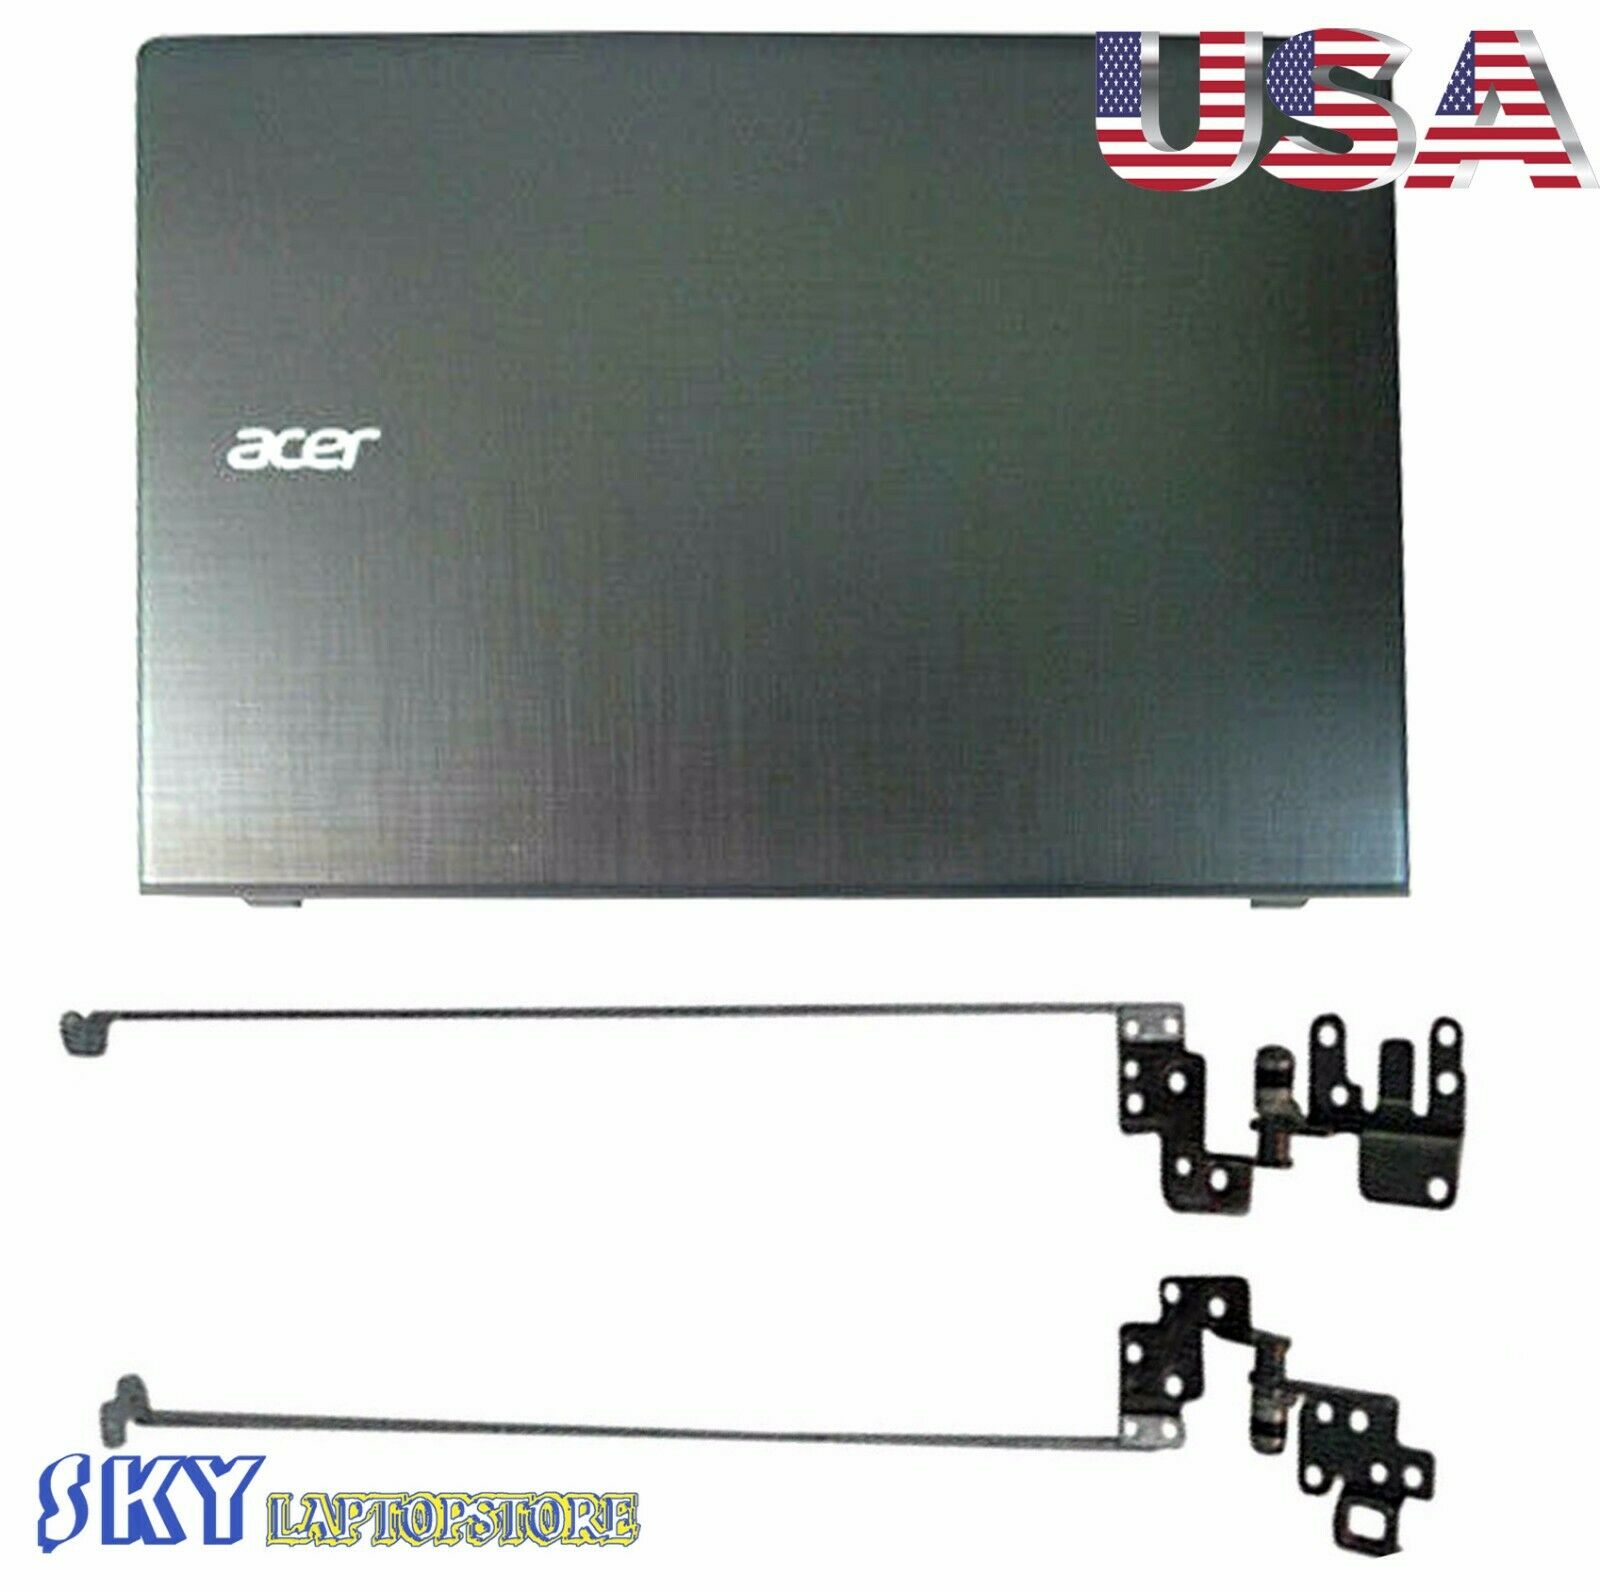 New Acer Aspire E5-575 E5-575g E5-575t E5-575tg Top Case Lcd Back Cover & Hinges